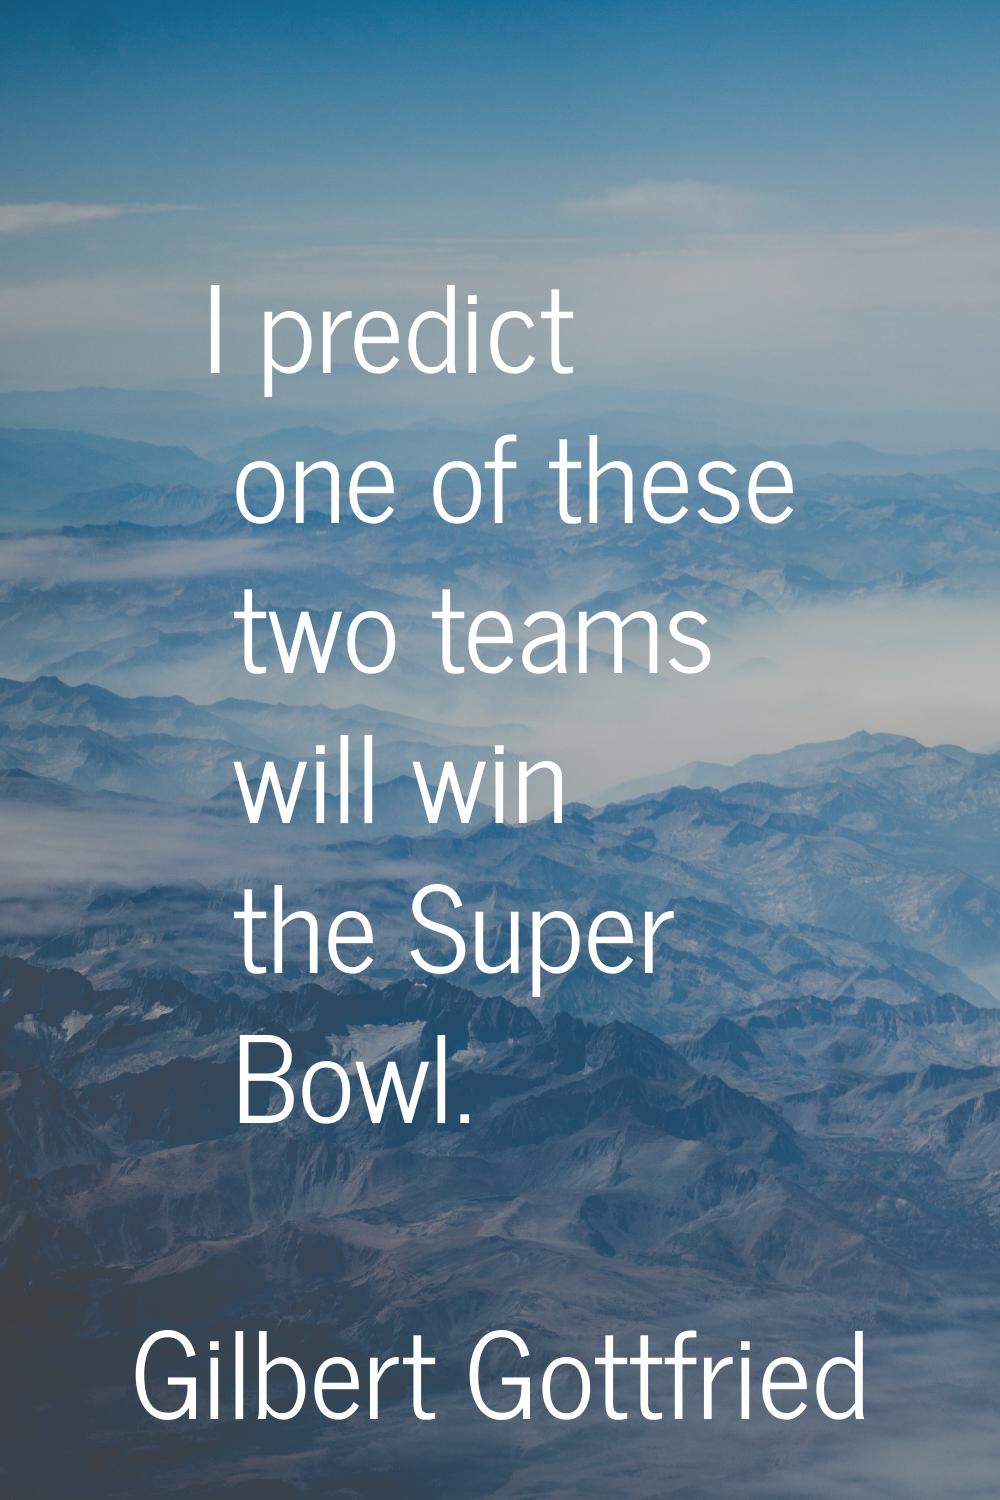 I predict one of these two teams will win the Super Bowl.